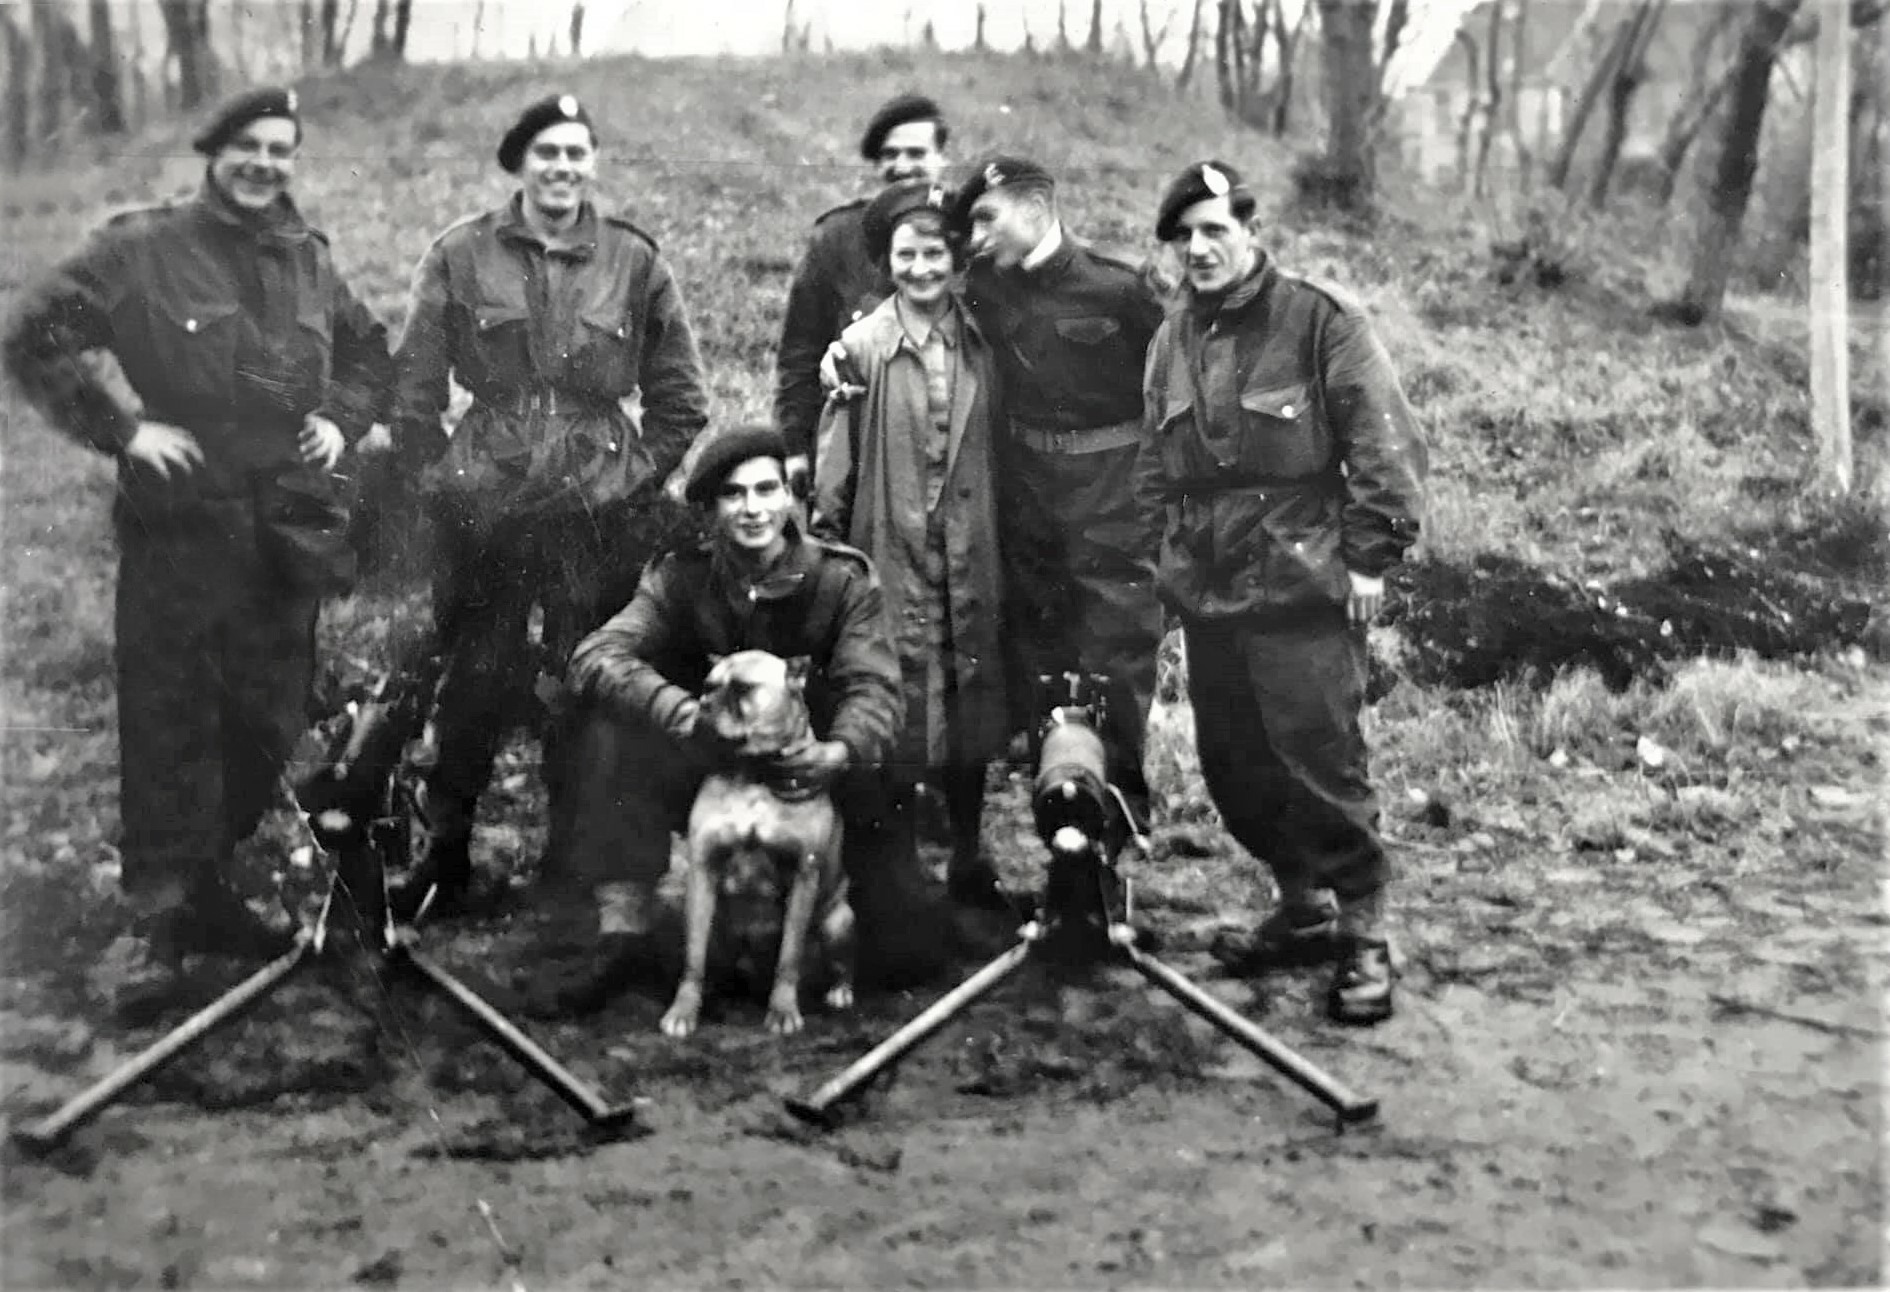 Members of the MG Section of the Heavy Weapons Troop.